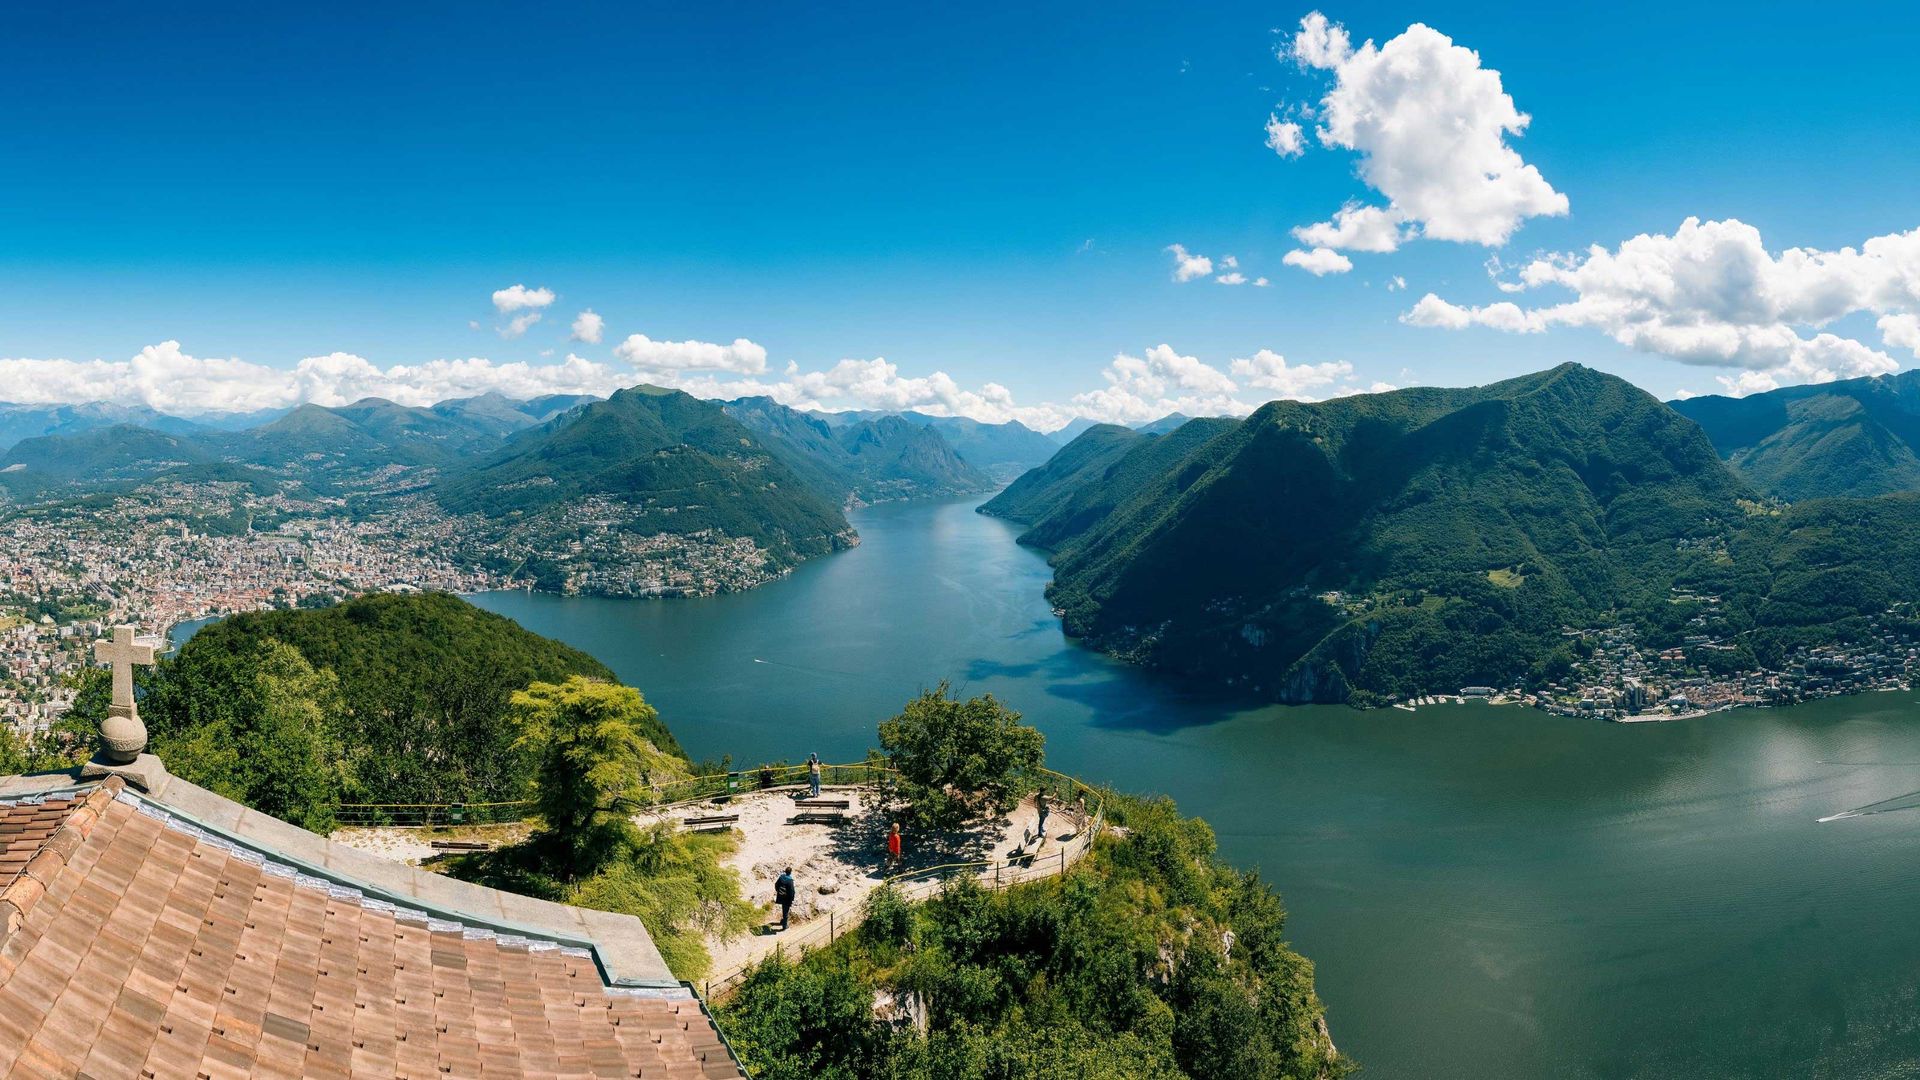 Panoramic view of Lake Lugano surrounded by mountains with visitors enjoying the landscape from a high vantage point.